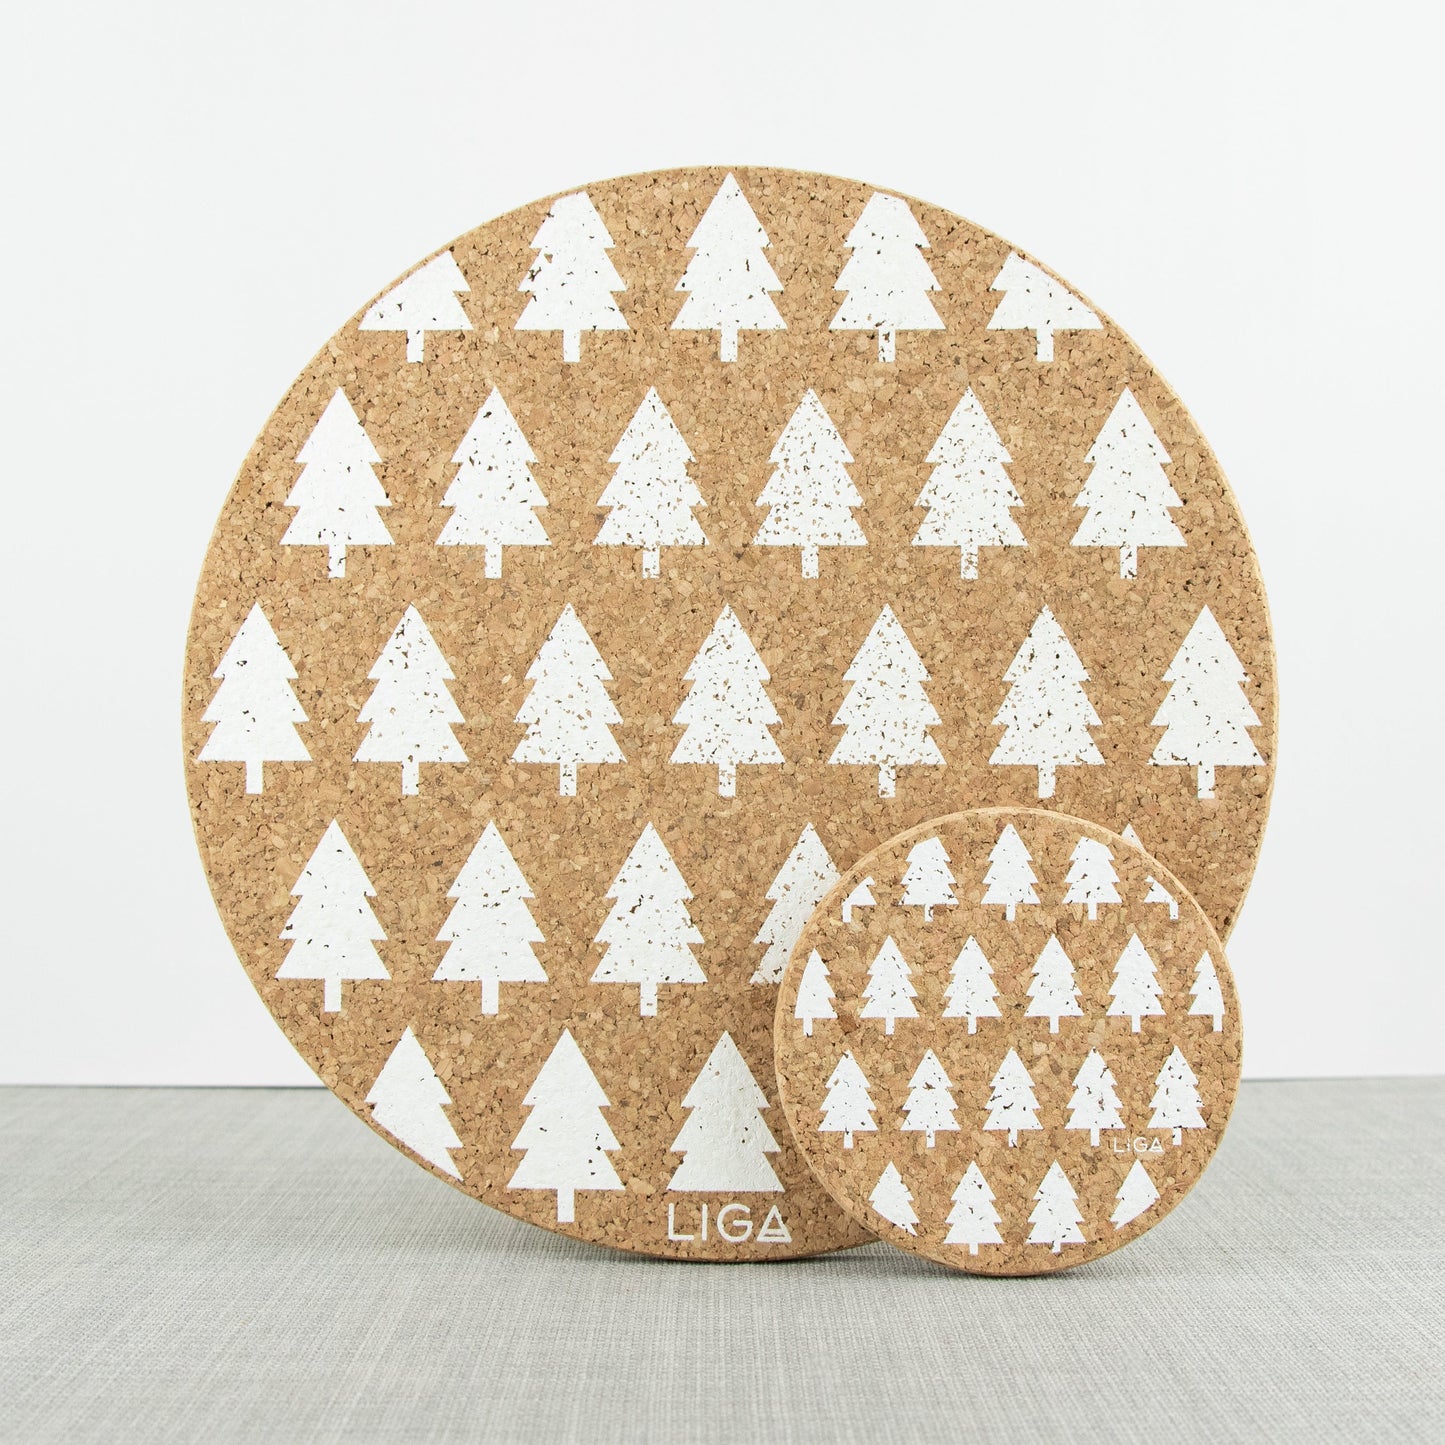 LIGA eco living sustainable cork coaster and placemat with white printed tree design